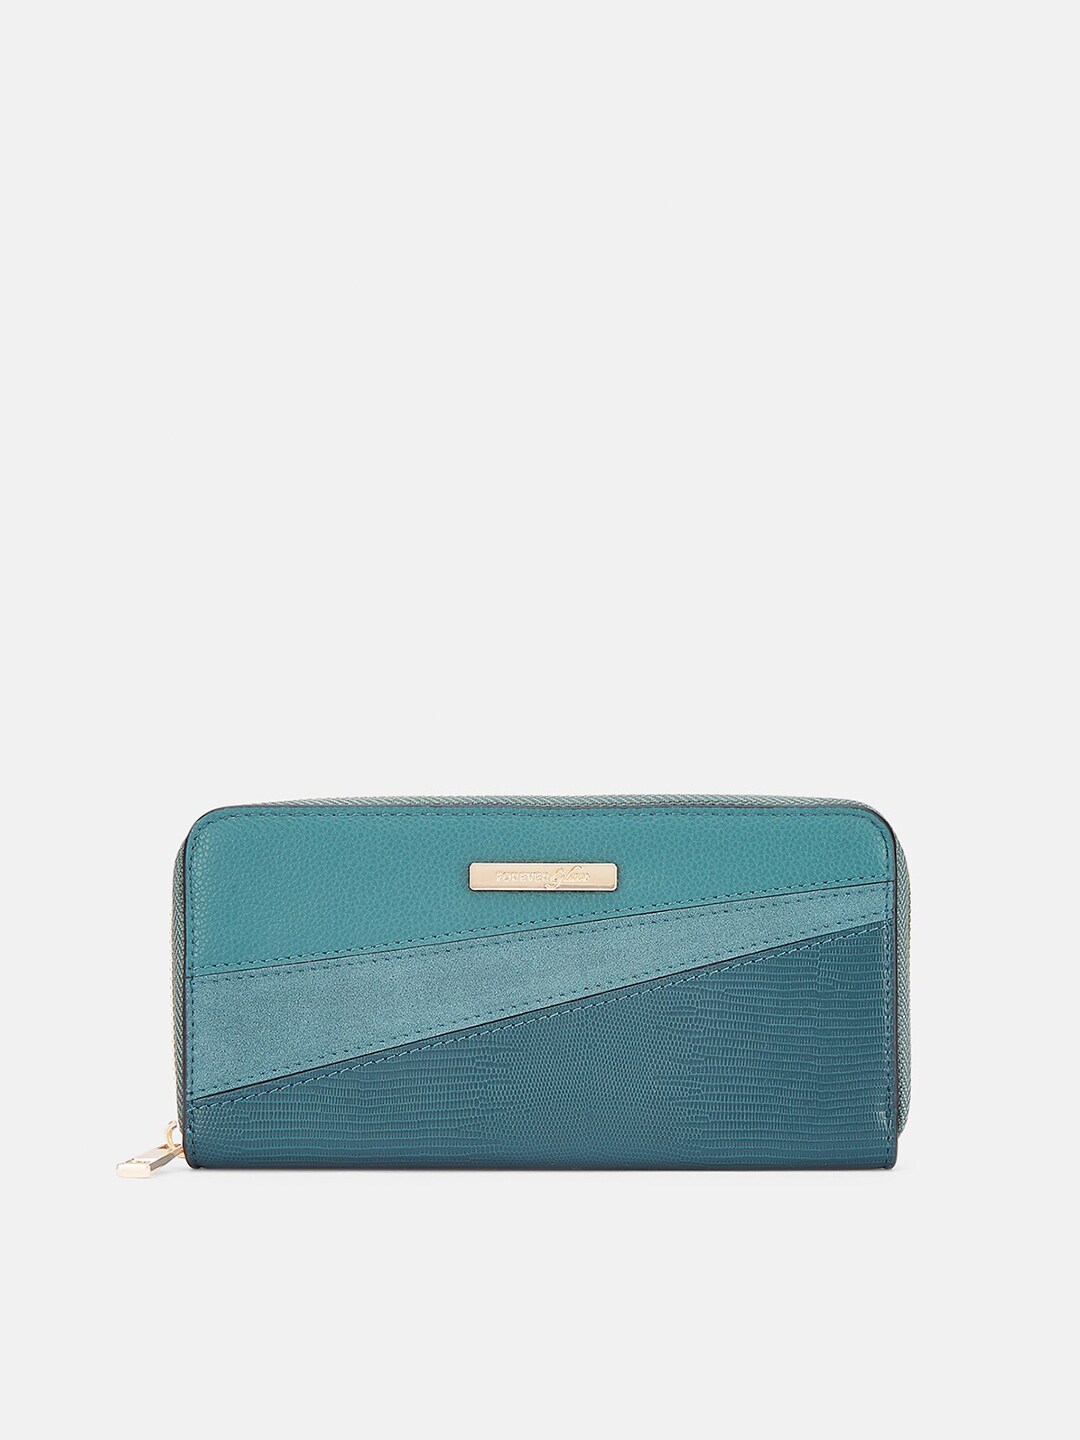 Forever Glam by Pantaloons Women Teal & Blue Colourblocked Zip Around Wallet Price in India